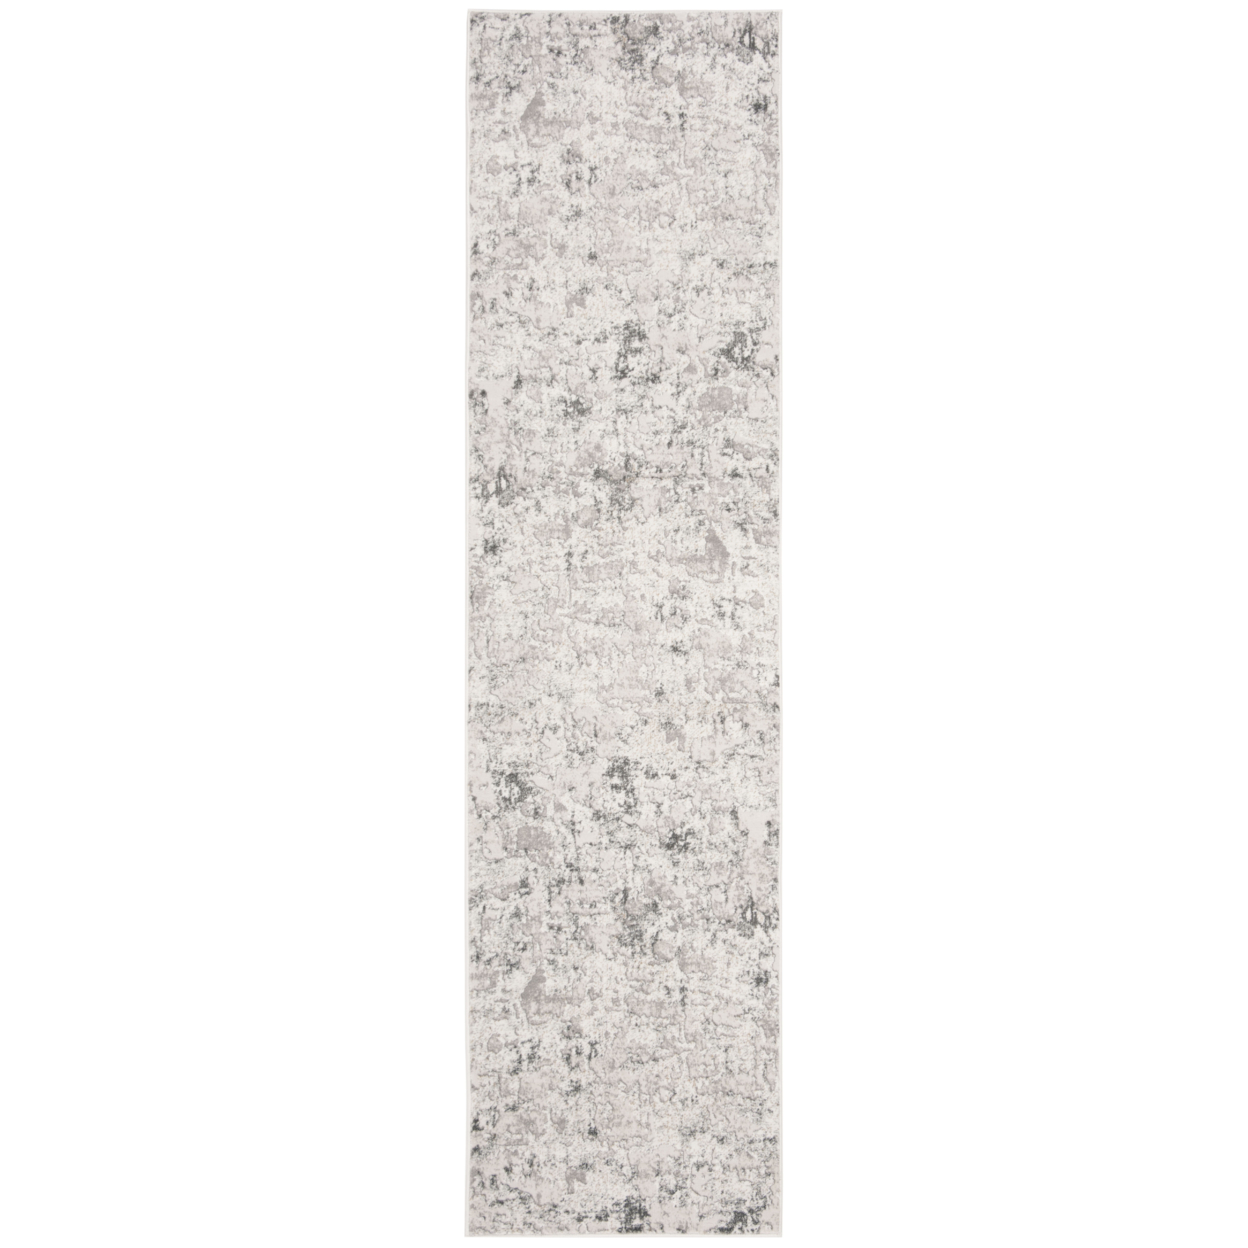 SAFAVIEH Vogue Collection VGE144A Beige / Charcoal Rug - 2' X 16'